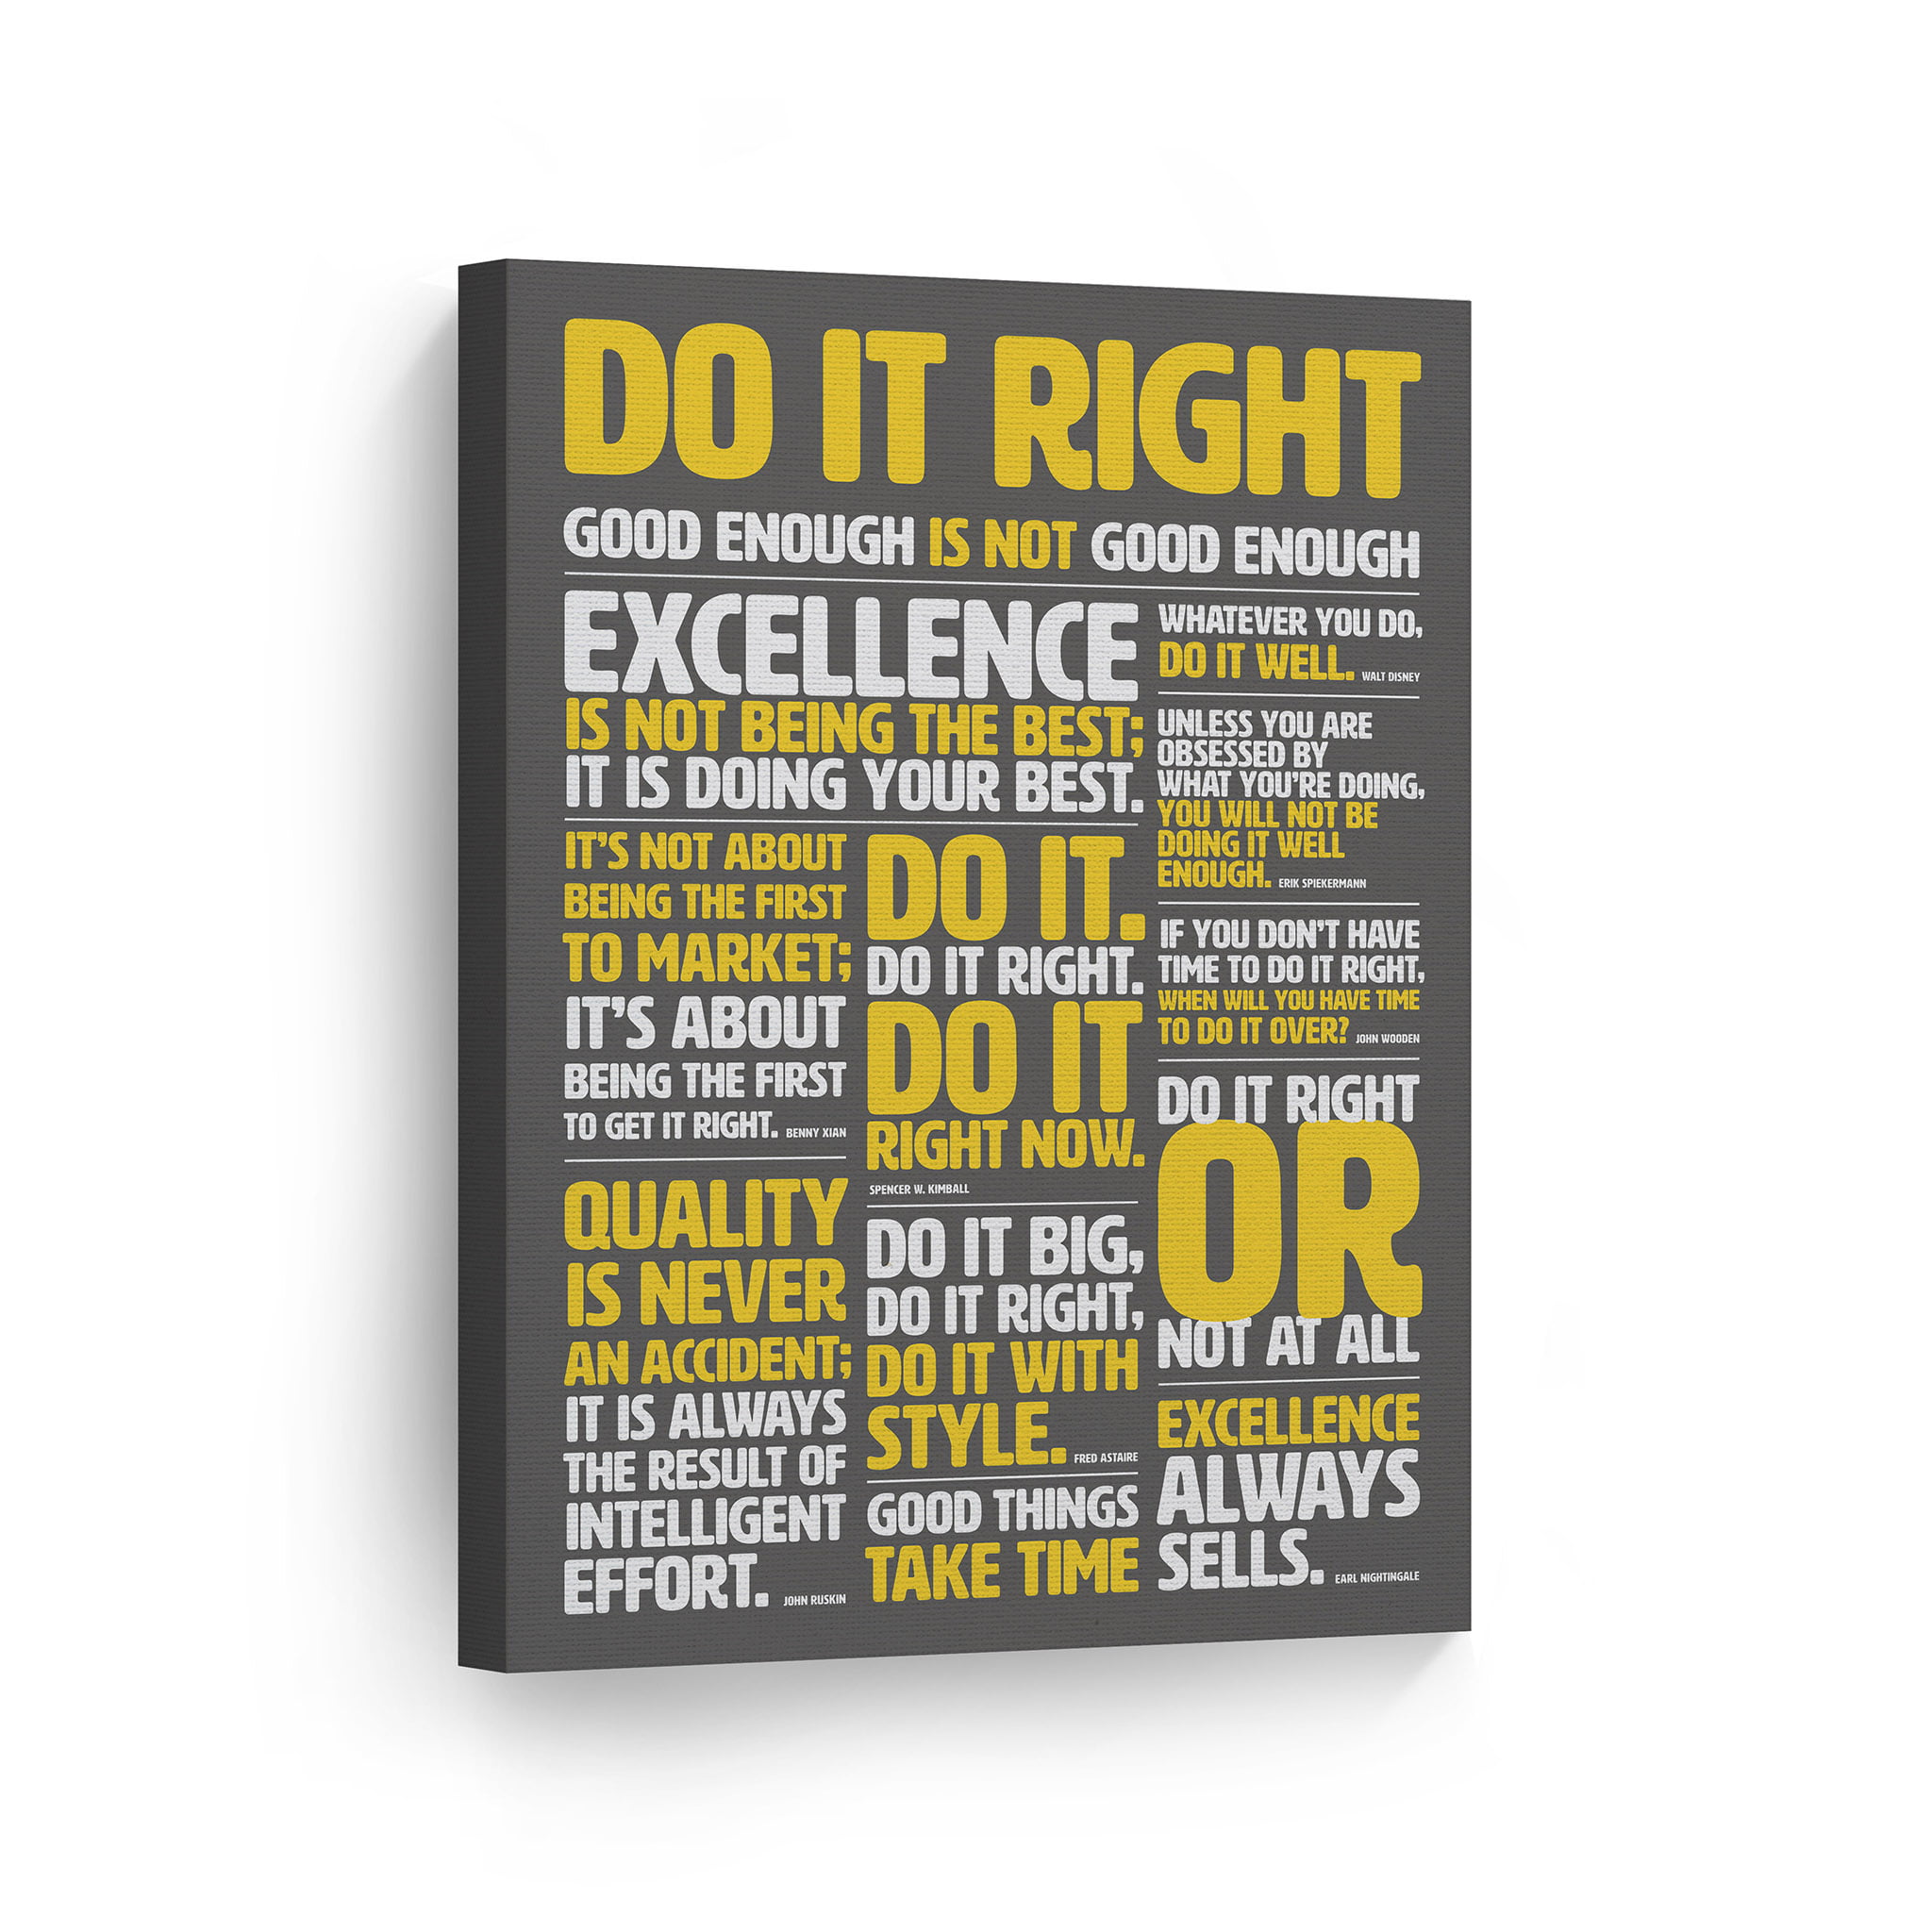 Smile Art Design Do It Right Good Enough Is Not Good Enough Quote Canvas Print Motivational Wall Art Saying Home Decor Artwork Bedroom Living Room Made In The Usa 40x30